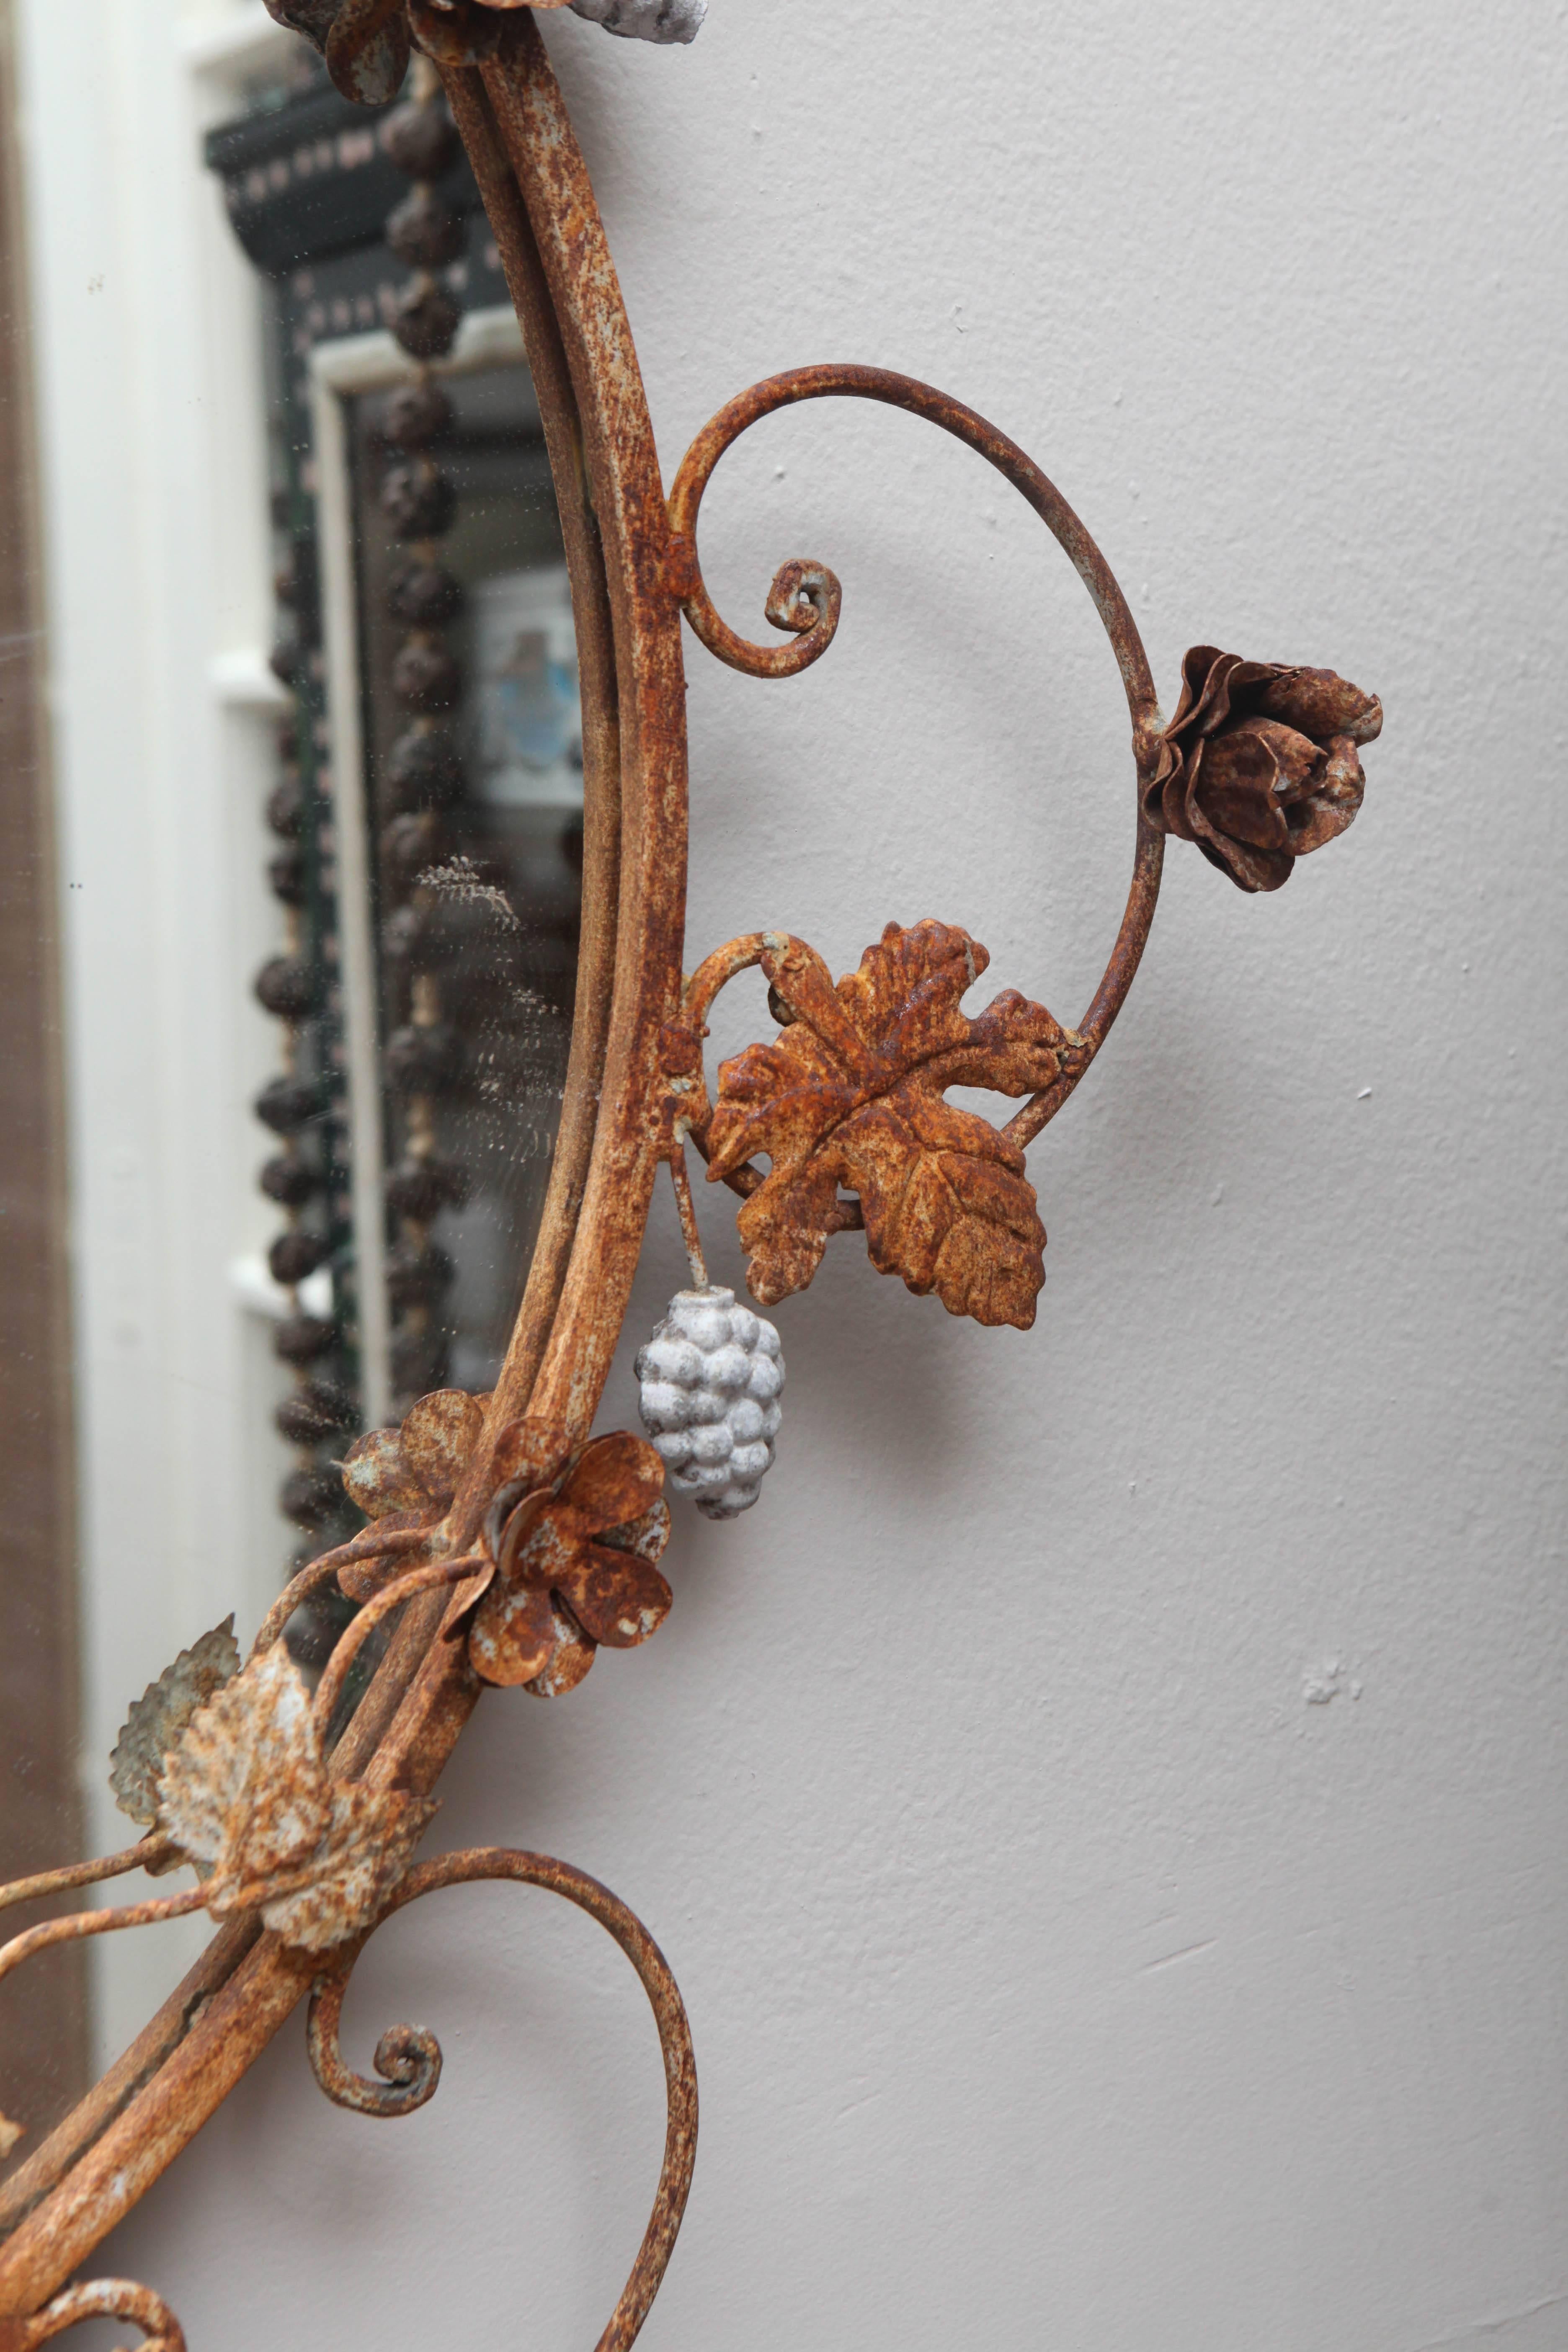 Vintage rusted mirror. Hand wrought iron.  Probably not terribly old but great look.  Round mirror inset is new.  Some remnants of white paint and quite rusted.